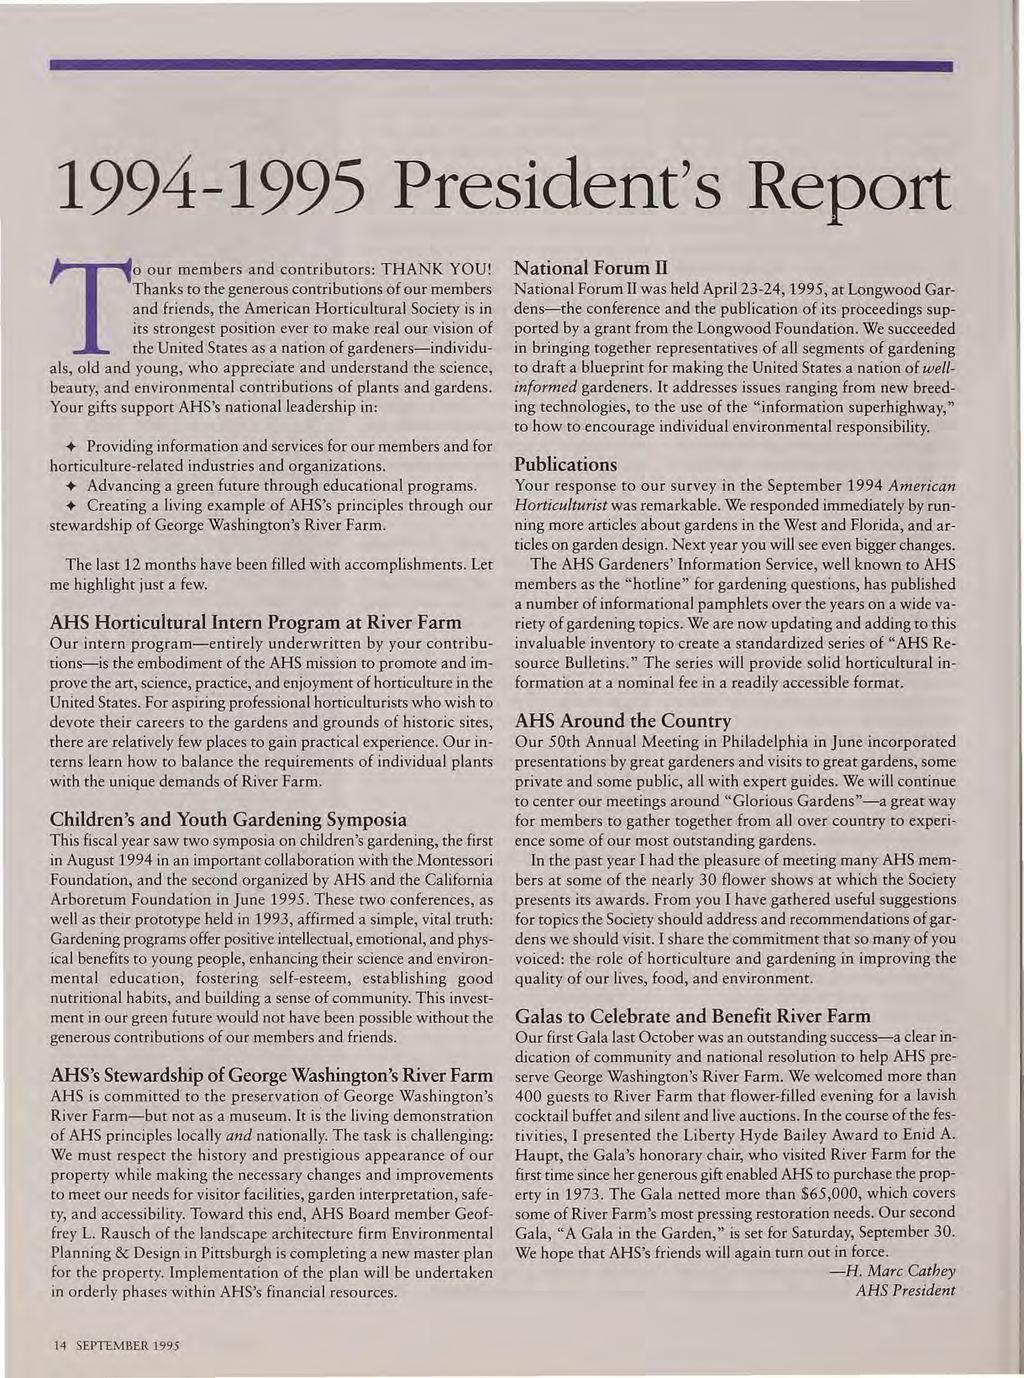 1994-1995 President's Report To our members and contributors: THANK YOUl Thanks to the generous contributions of our members and friends, the American Horticultural Society is in its strongest